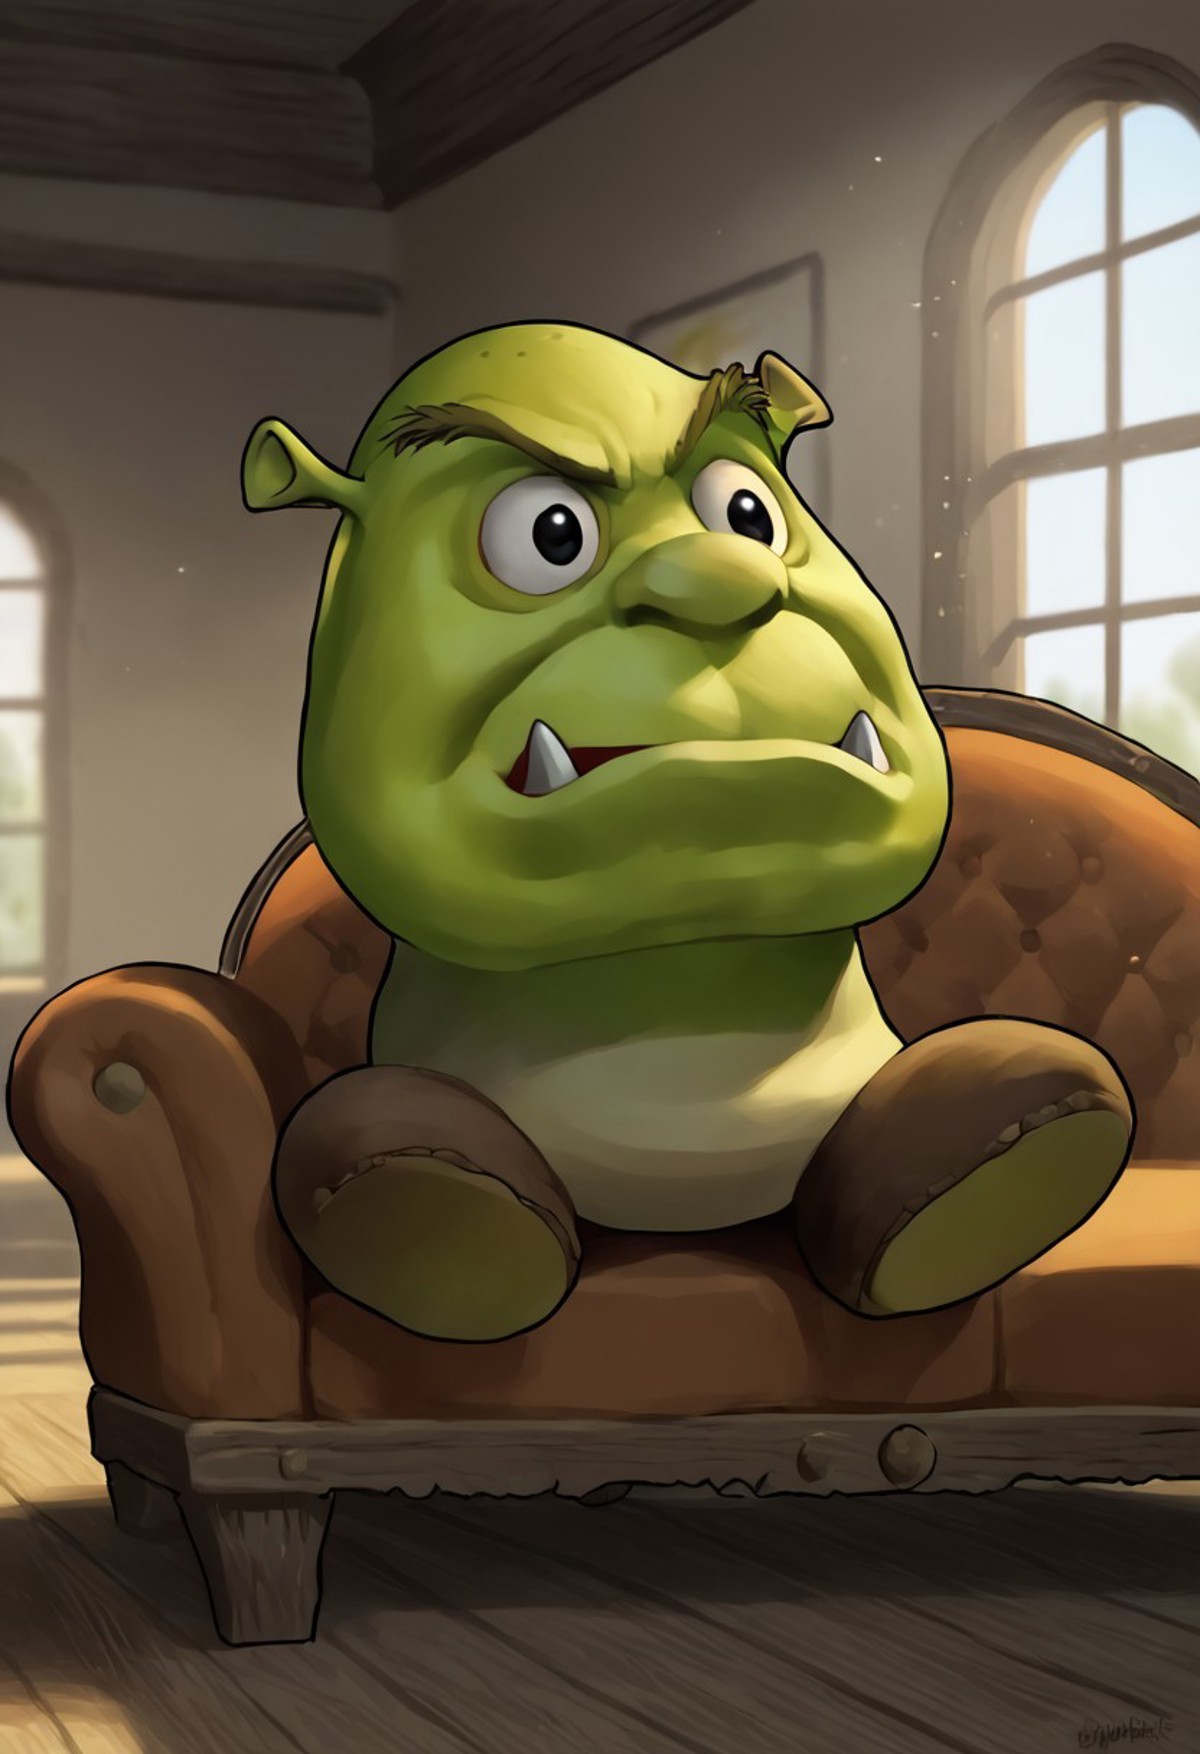 A certain green ogre with the body of a goomba sitting on a brown leather sofa in a room with wooden floors and walls. 